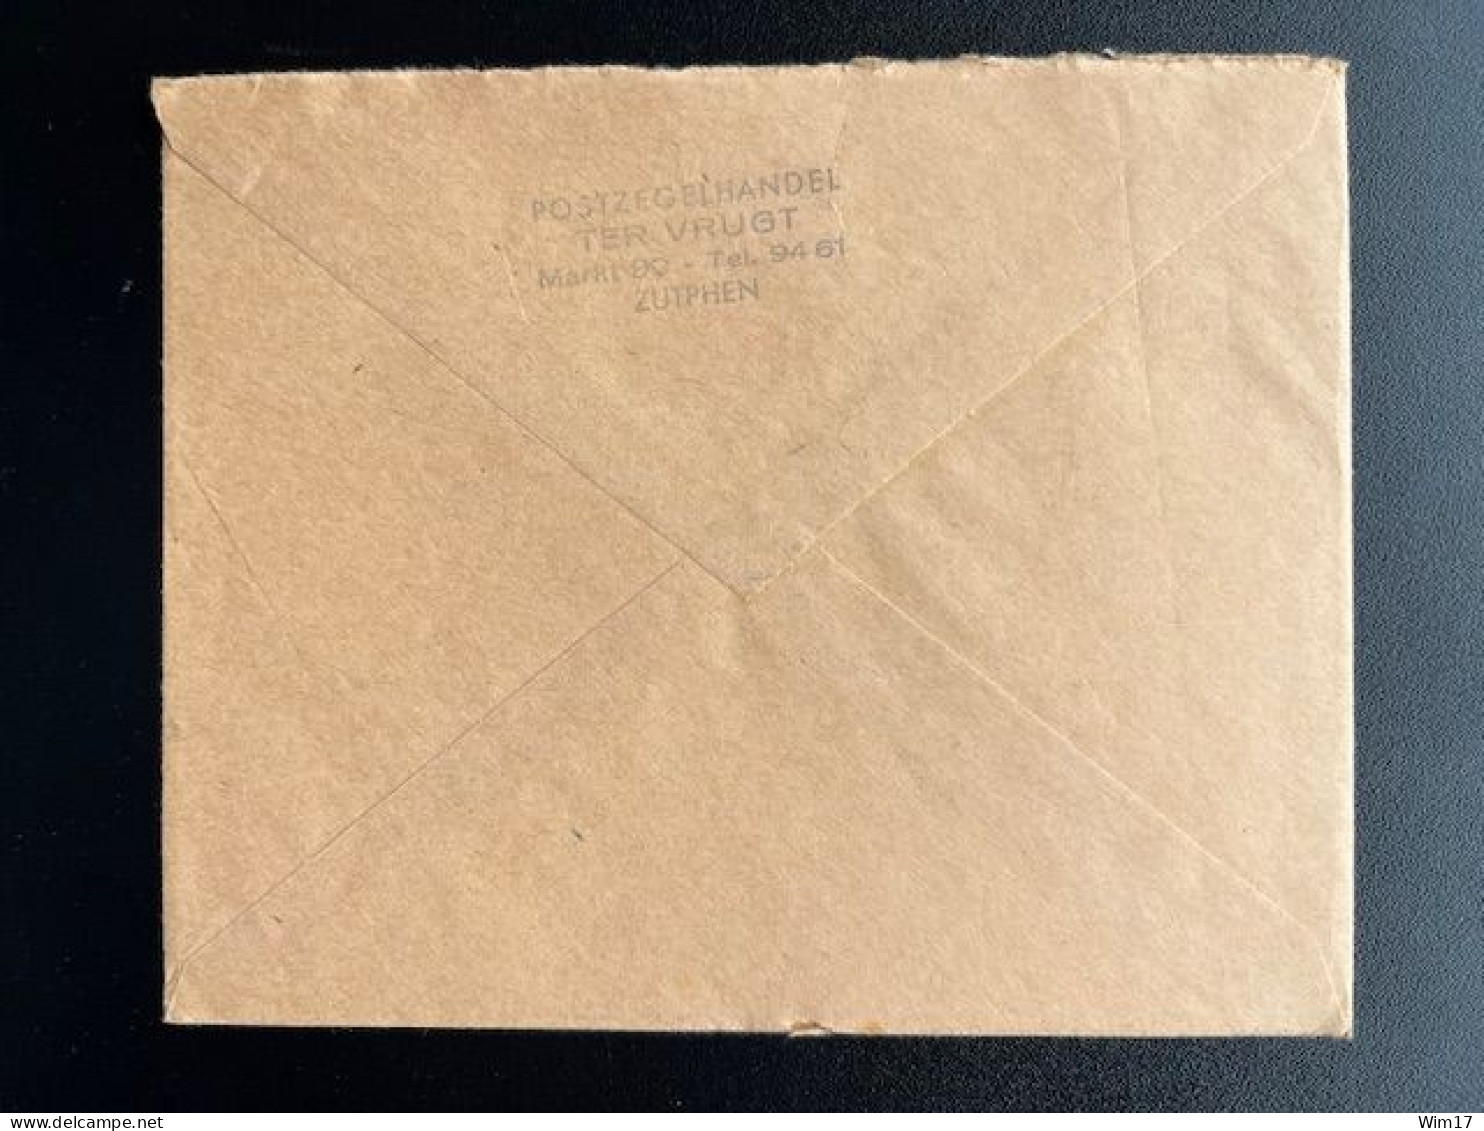 NETHERLANDS 1972 LETTER ZUTPHEN TO ENSCHEDE 18-08-1972 NEDERLAND OLYMPIC GAMES CYCLING - Covers & Documents